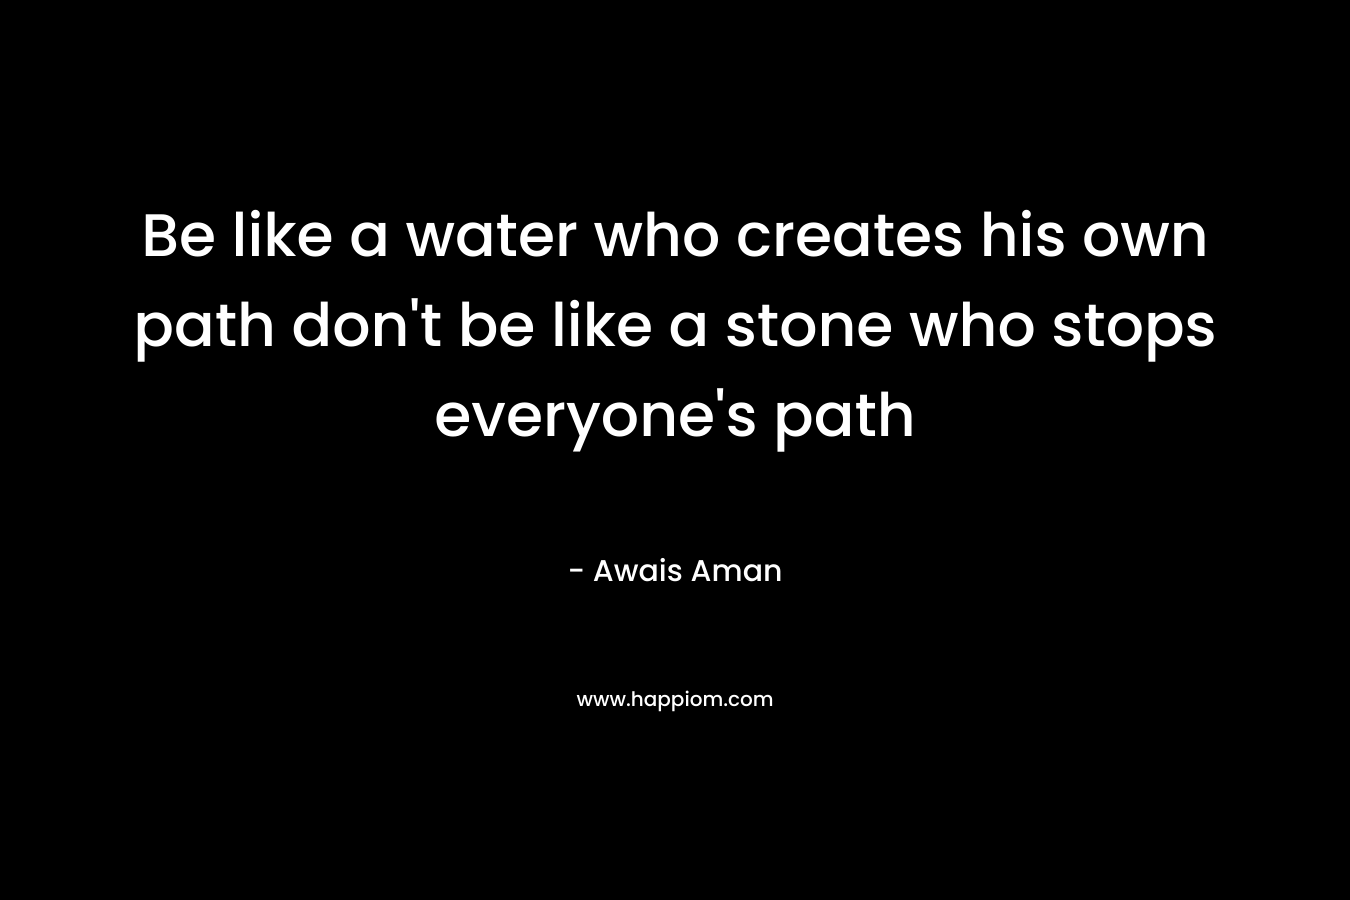 Be like a water who creates his own path don’t be like a stone who stops everyone’s path – Awais Aman